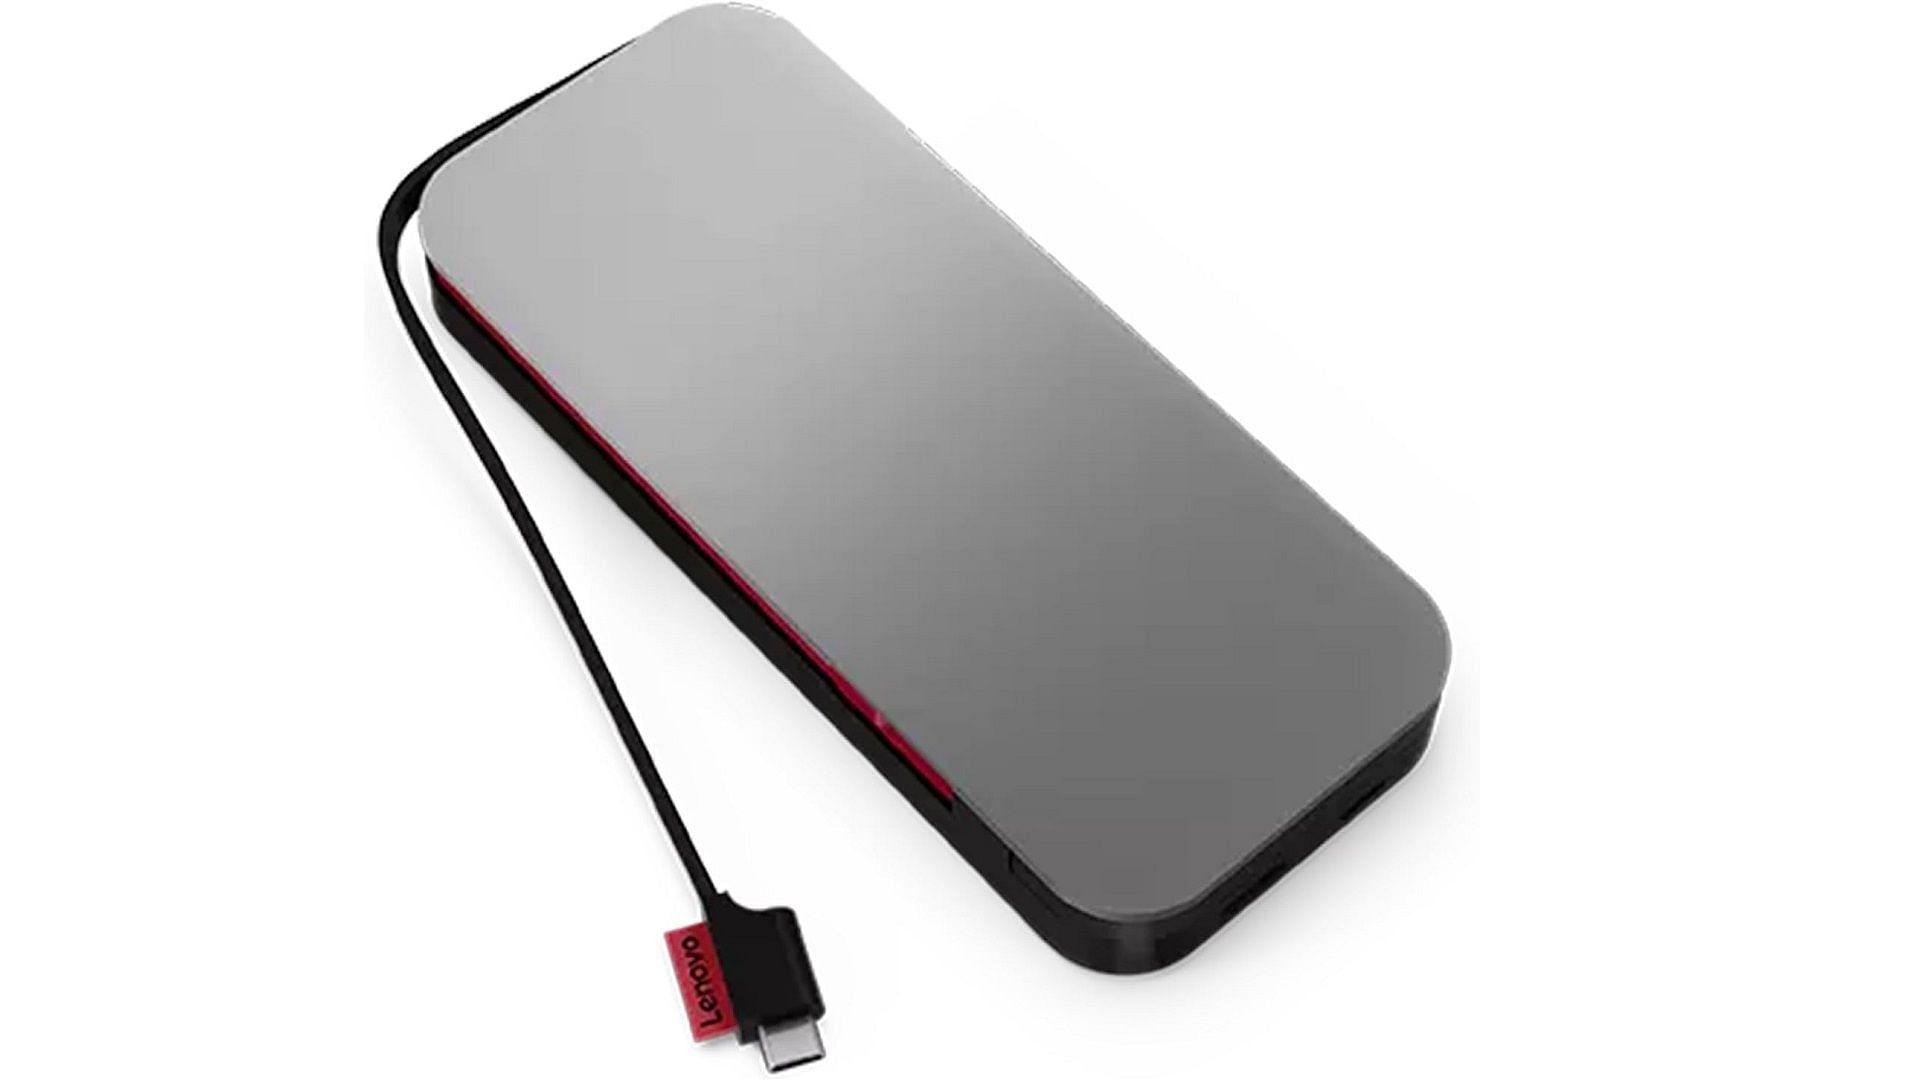 The Lenovo Go USB-C Power Bank is one of the best ROG Ally accessories right now (Image via Lenovo)